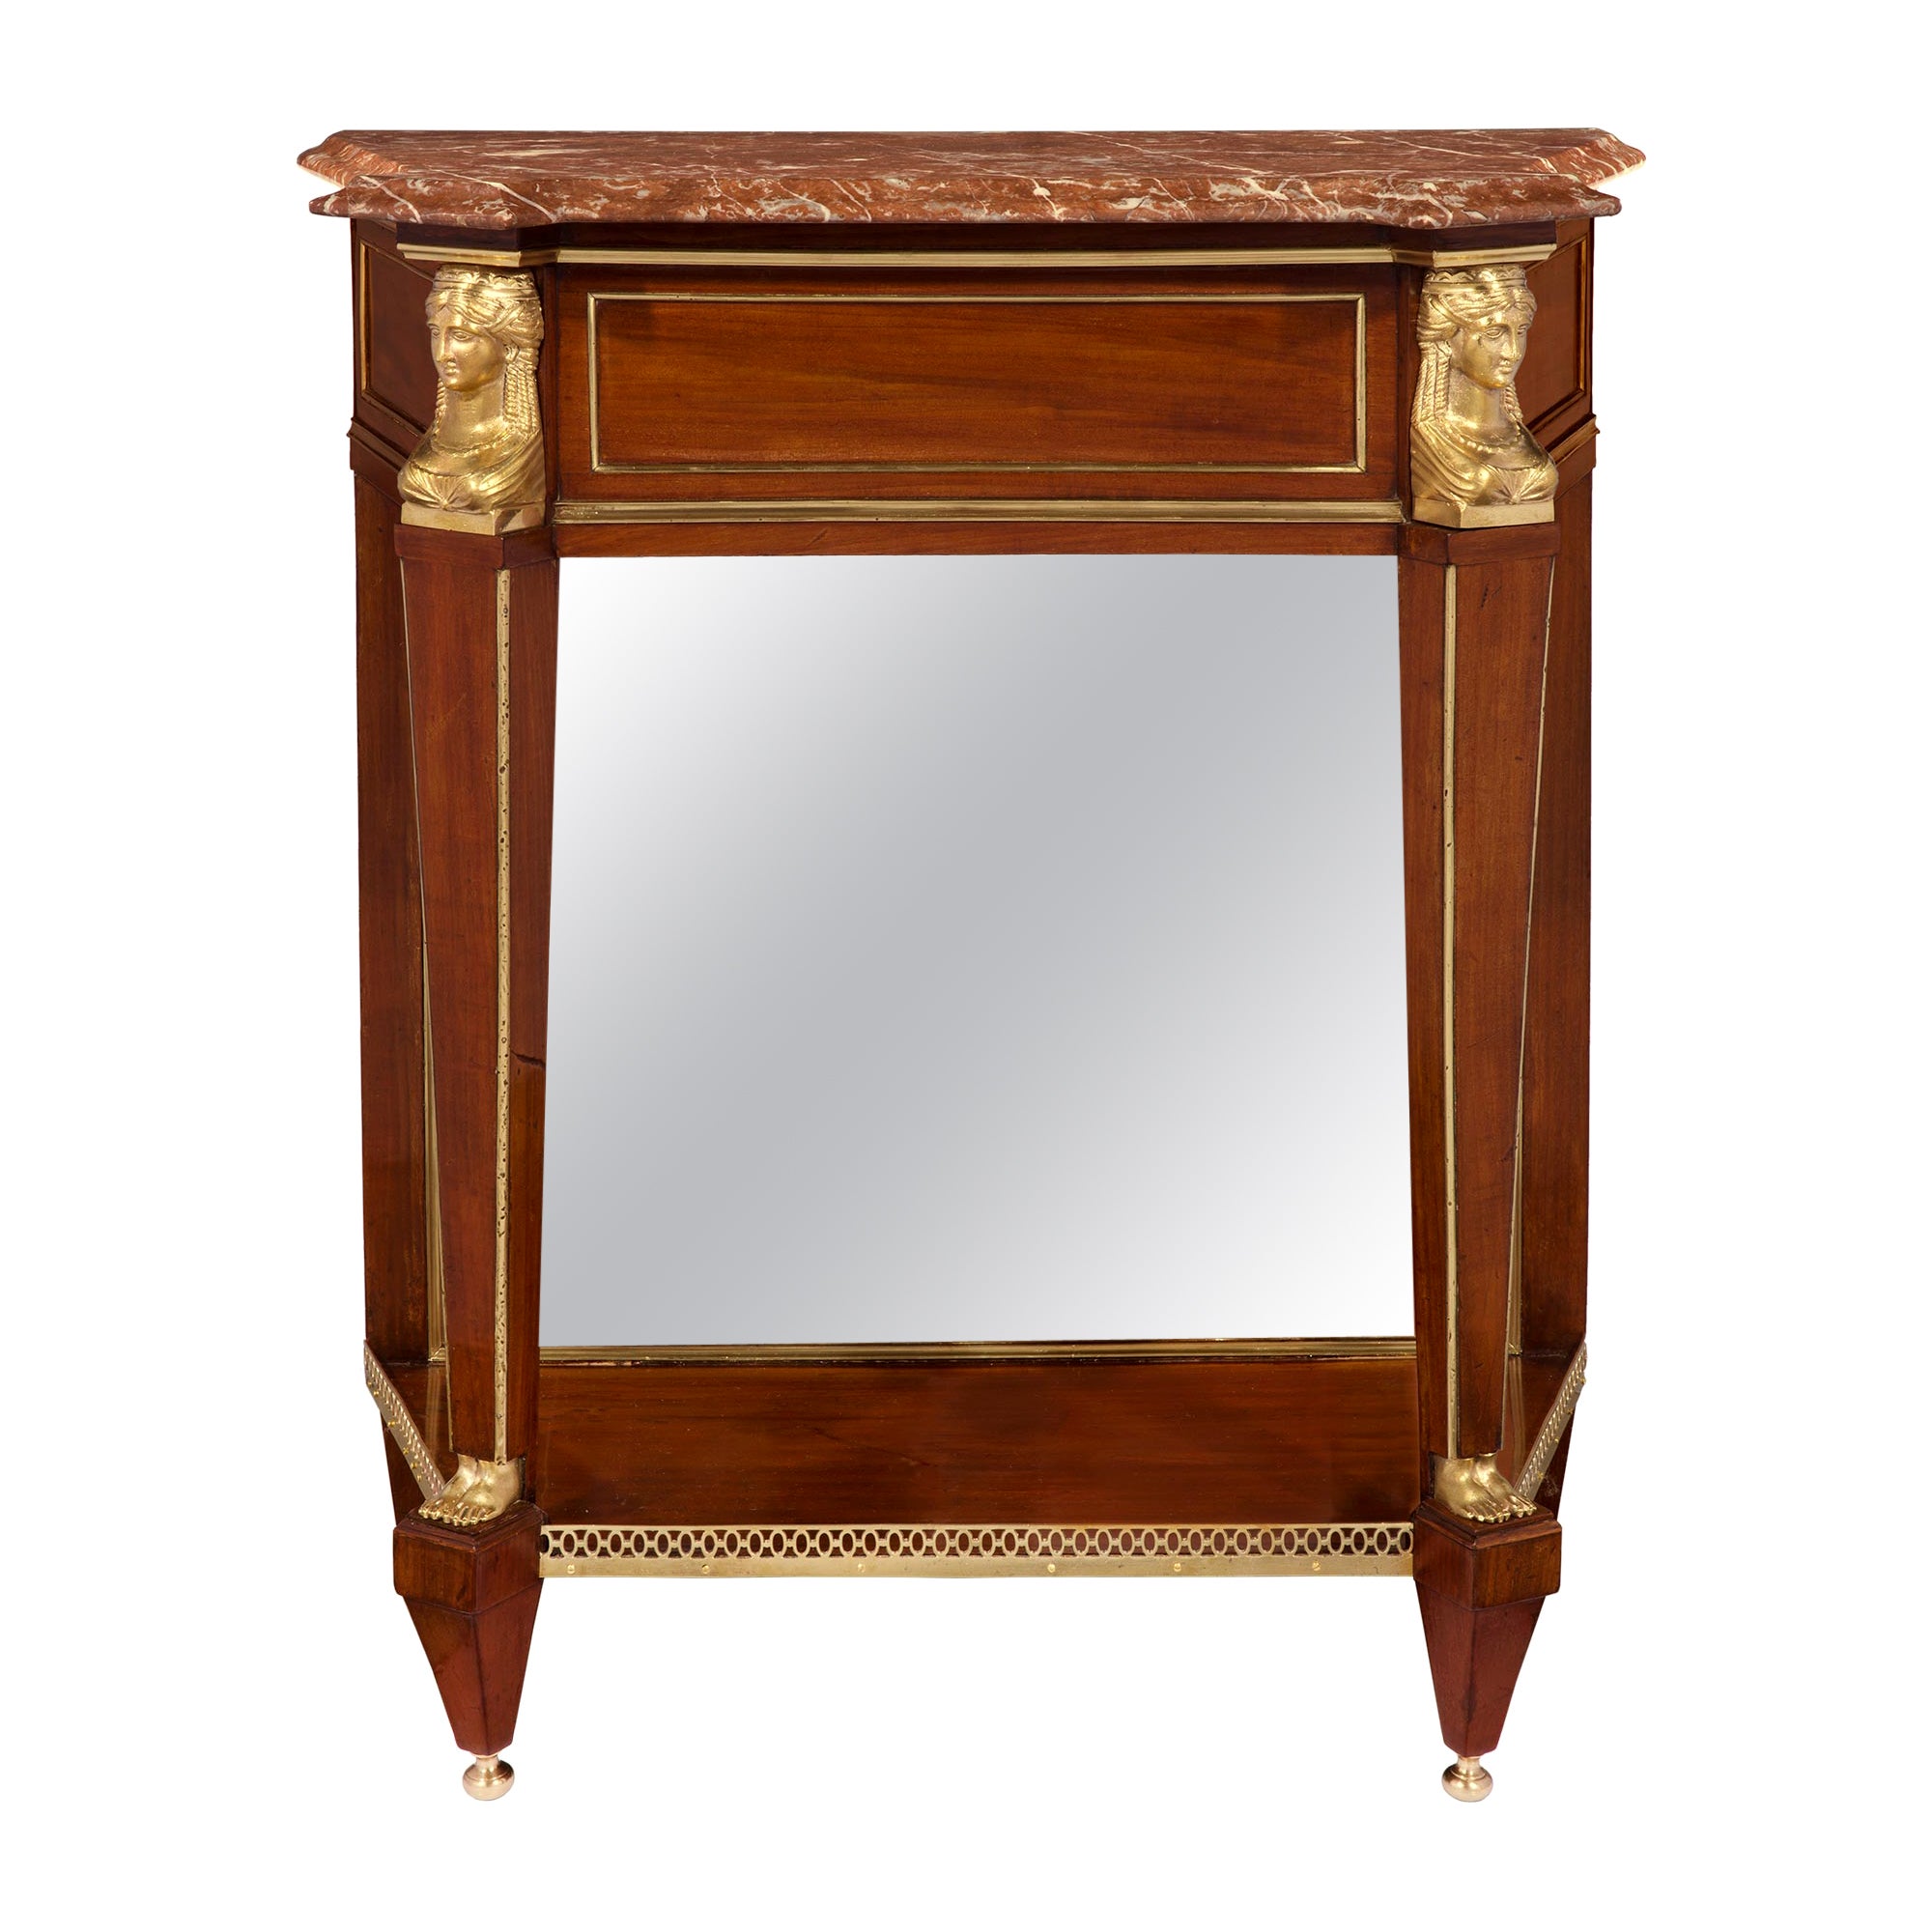 French 19th Century Neoclassical Style Mahogany, Ormolu and Marble Console For Sale